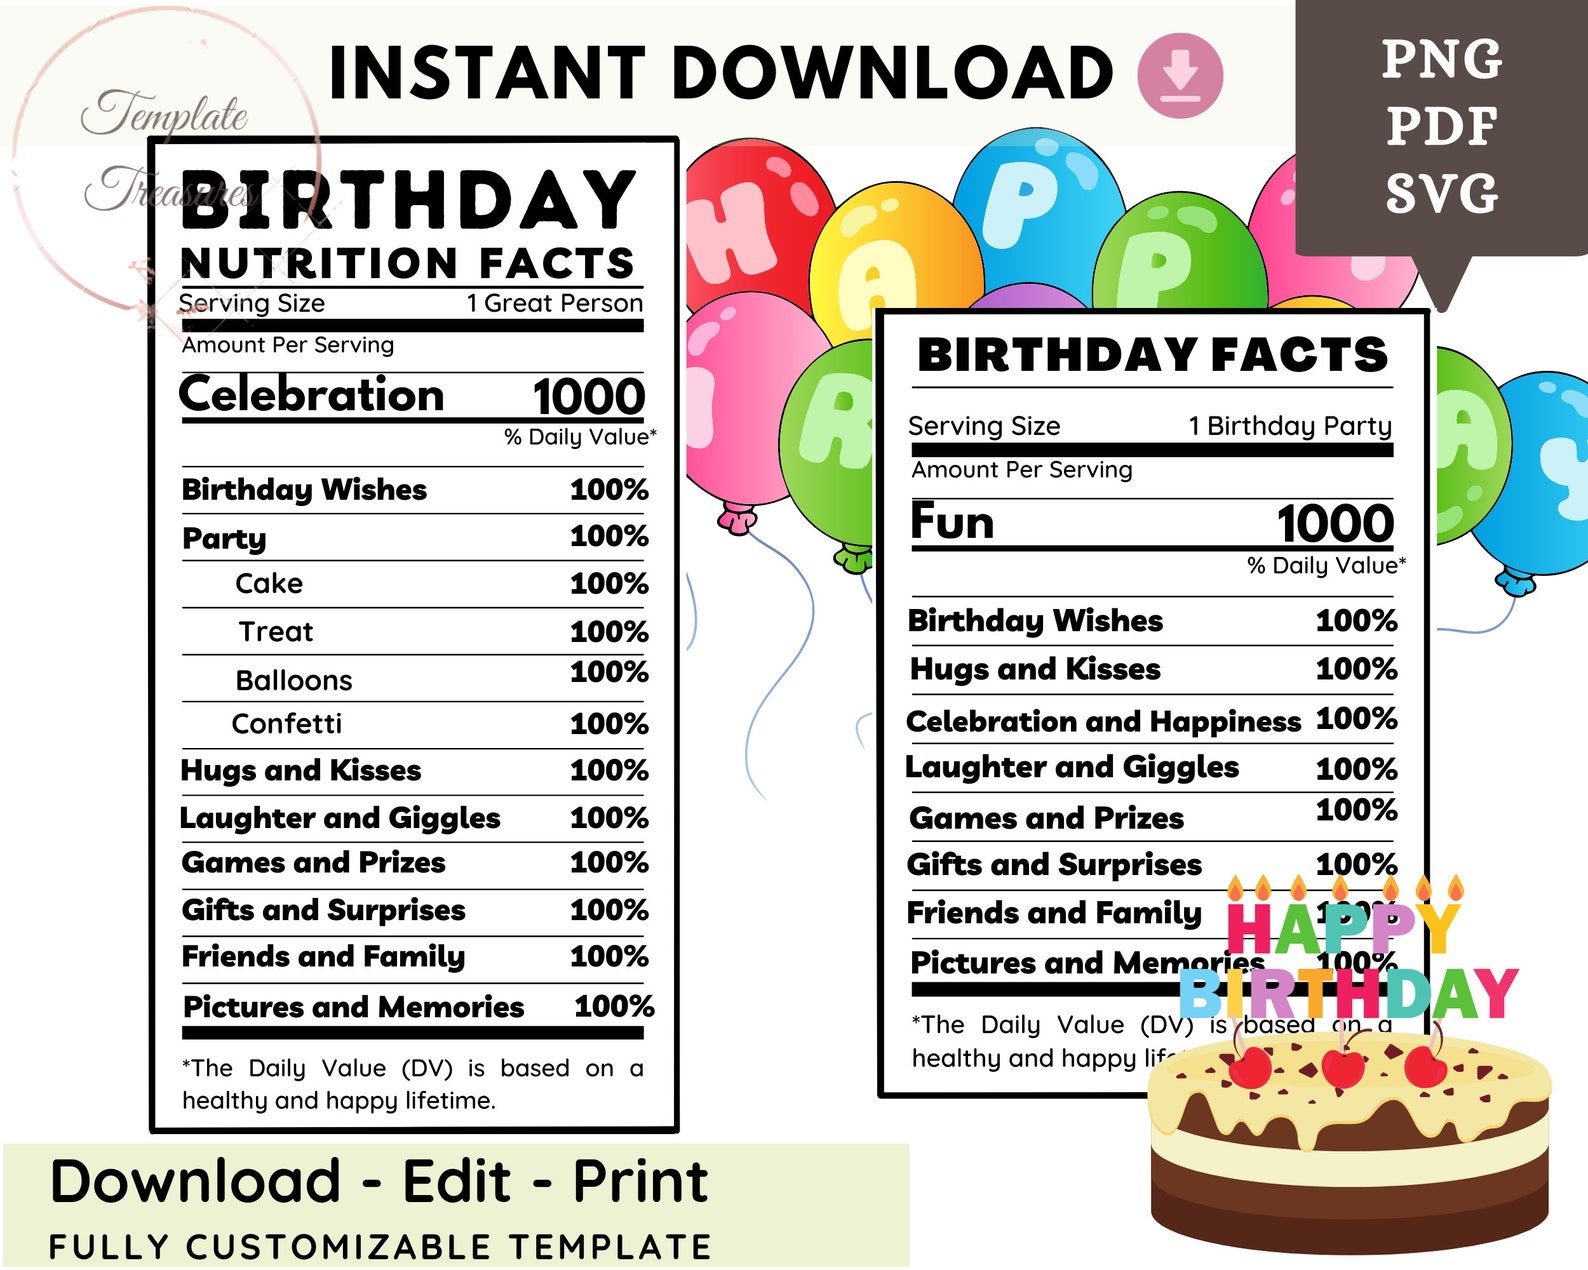 birthday-nutrition-facts-template-birthday-nutrition-facts-etsy